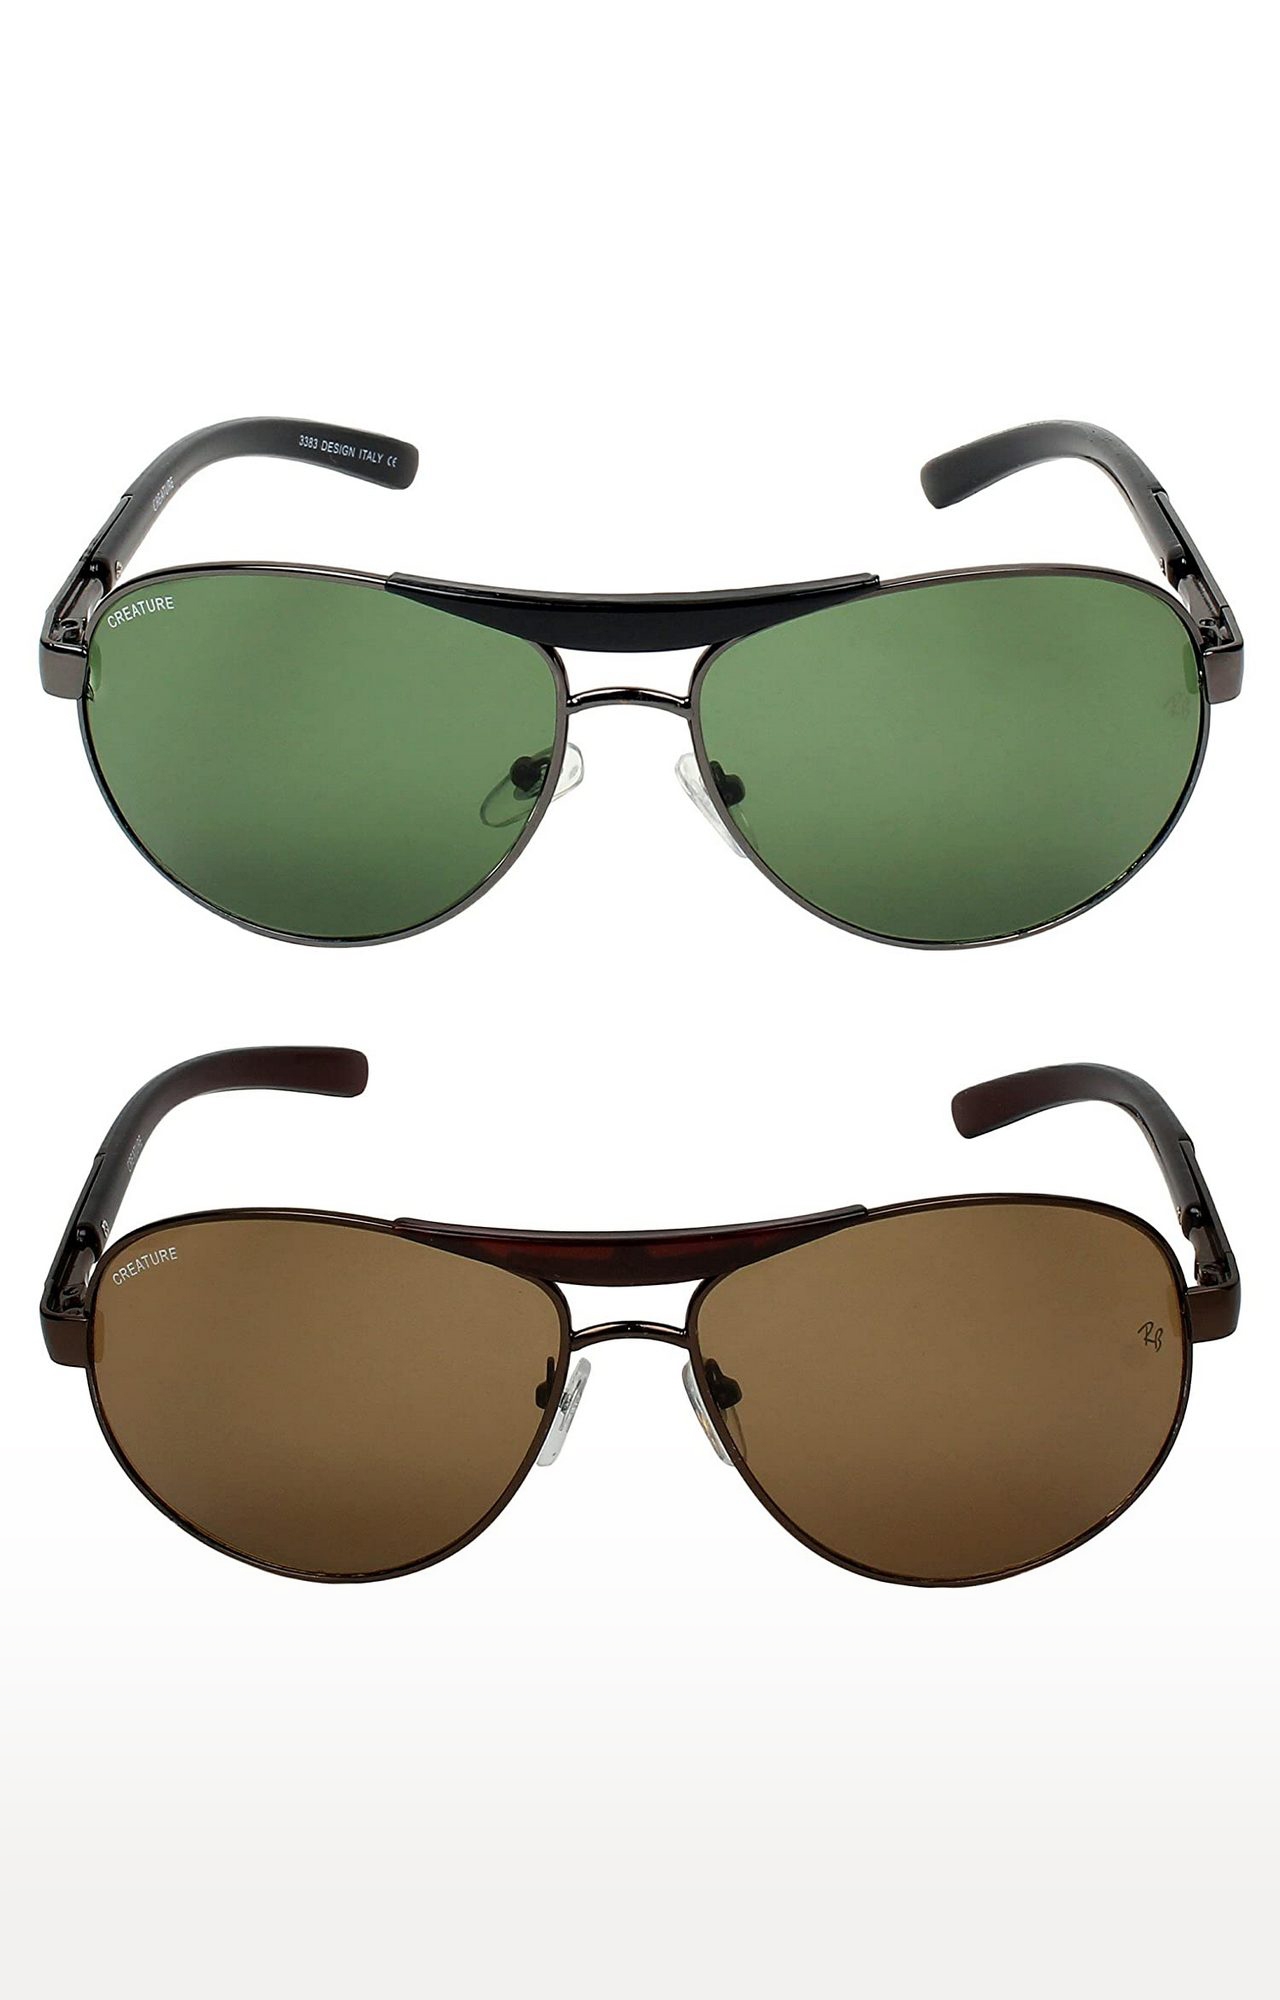 CREATURE | CREATURE Green & Brown Aviator Sunglasses Combo with UV Protection (Lens-Green & Brown|Frame-Black & Brown)